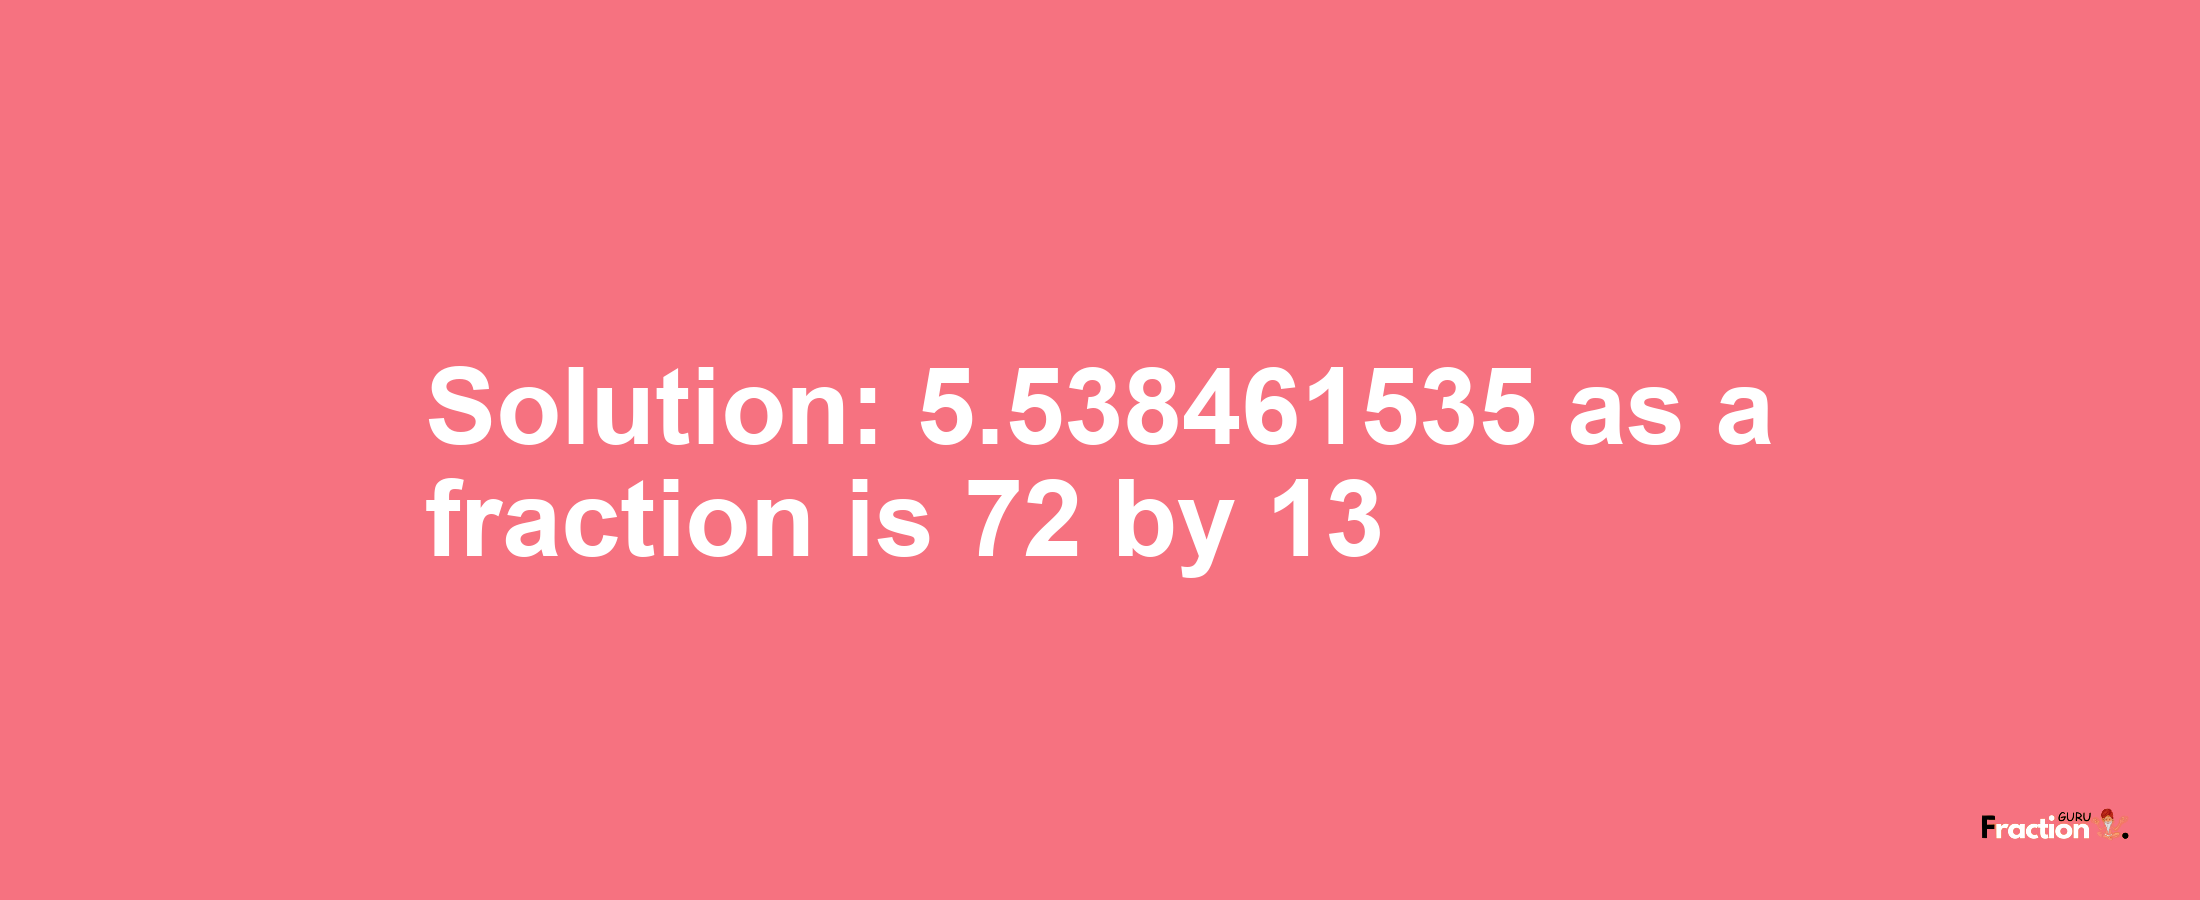 Solution:5.538461535 as a fraction is 72/13